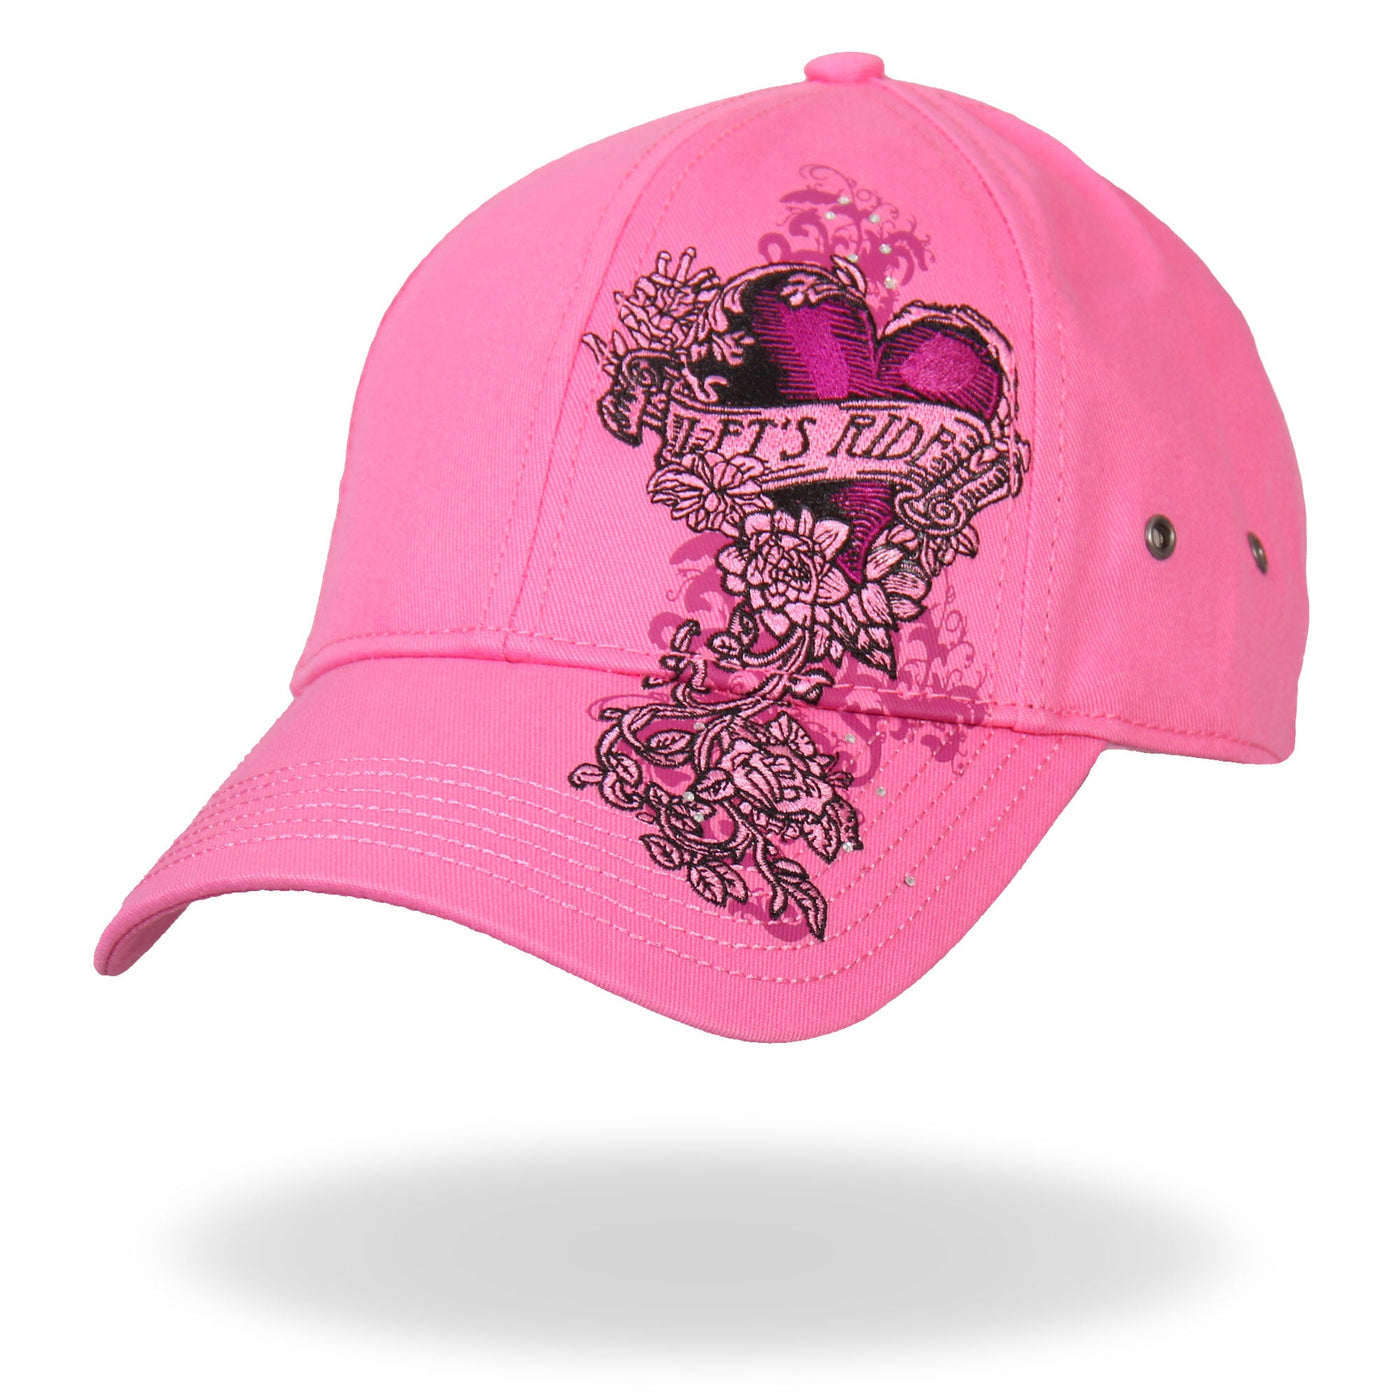 Hot Leathers BCA1043 Ladies Let's Ride Heart Pink Ball Cap